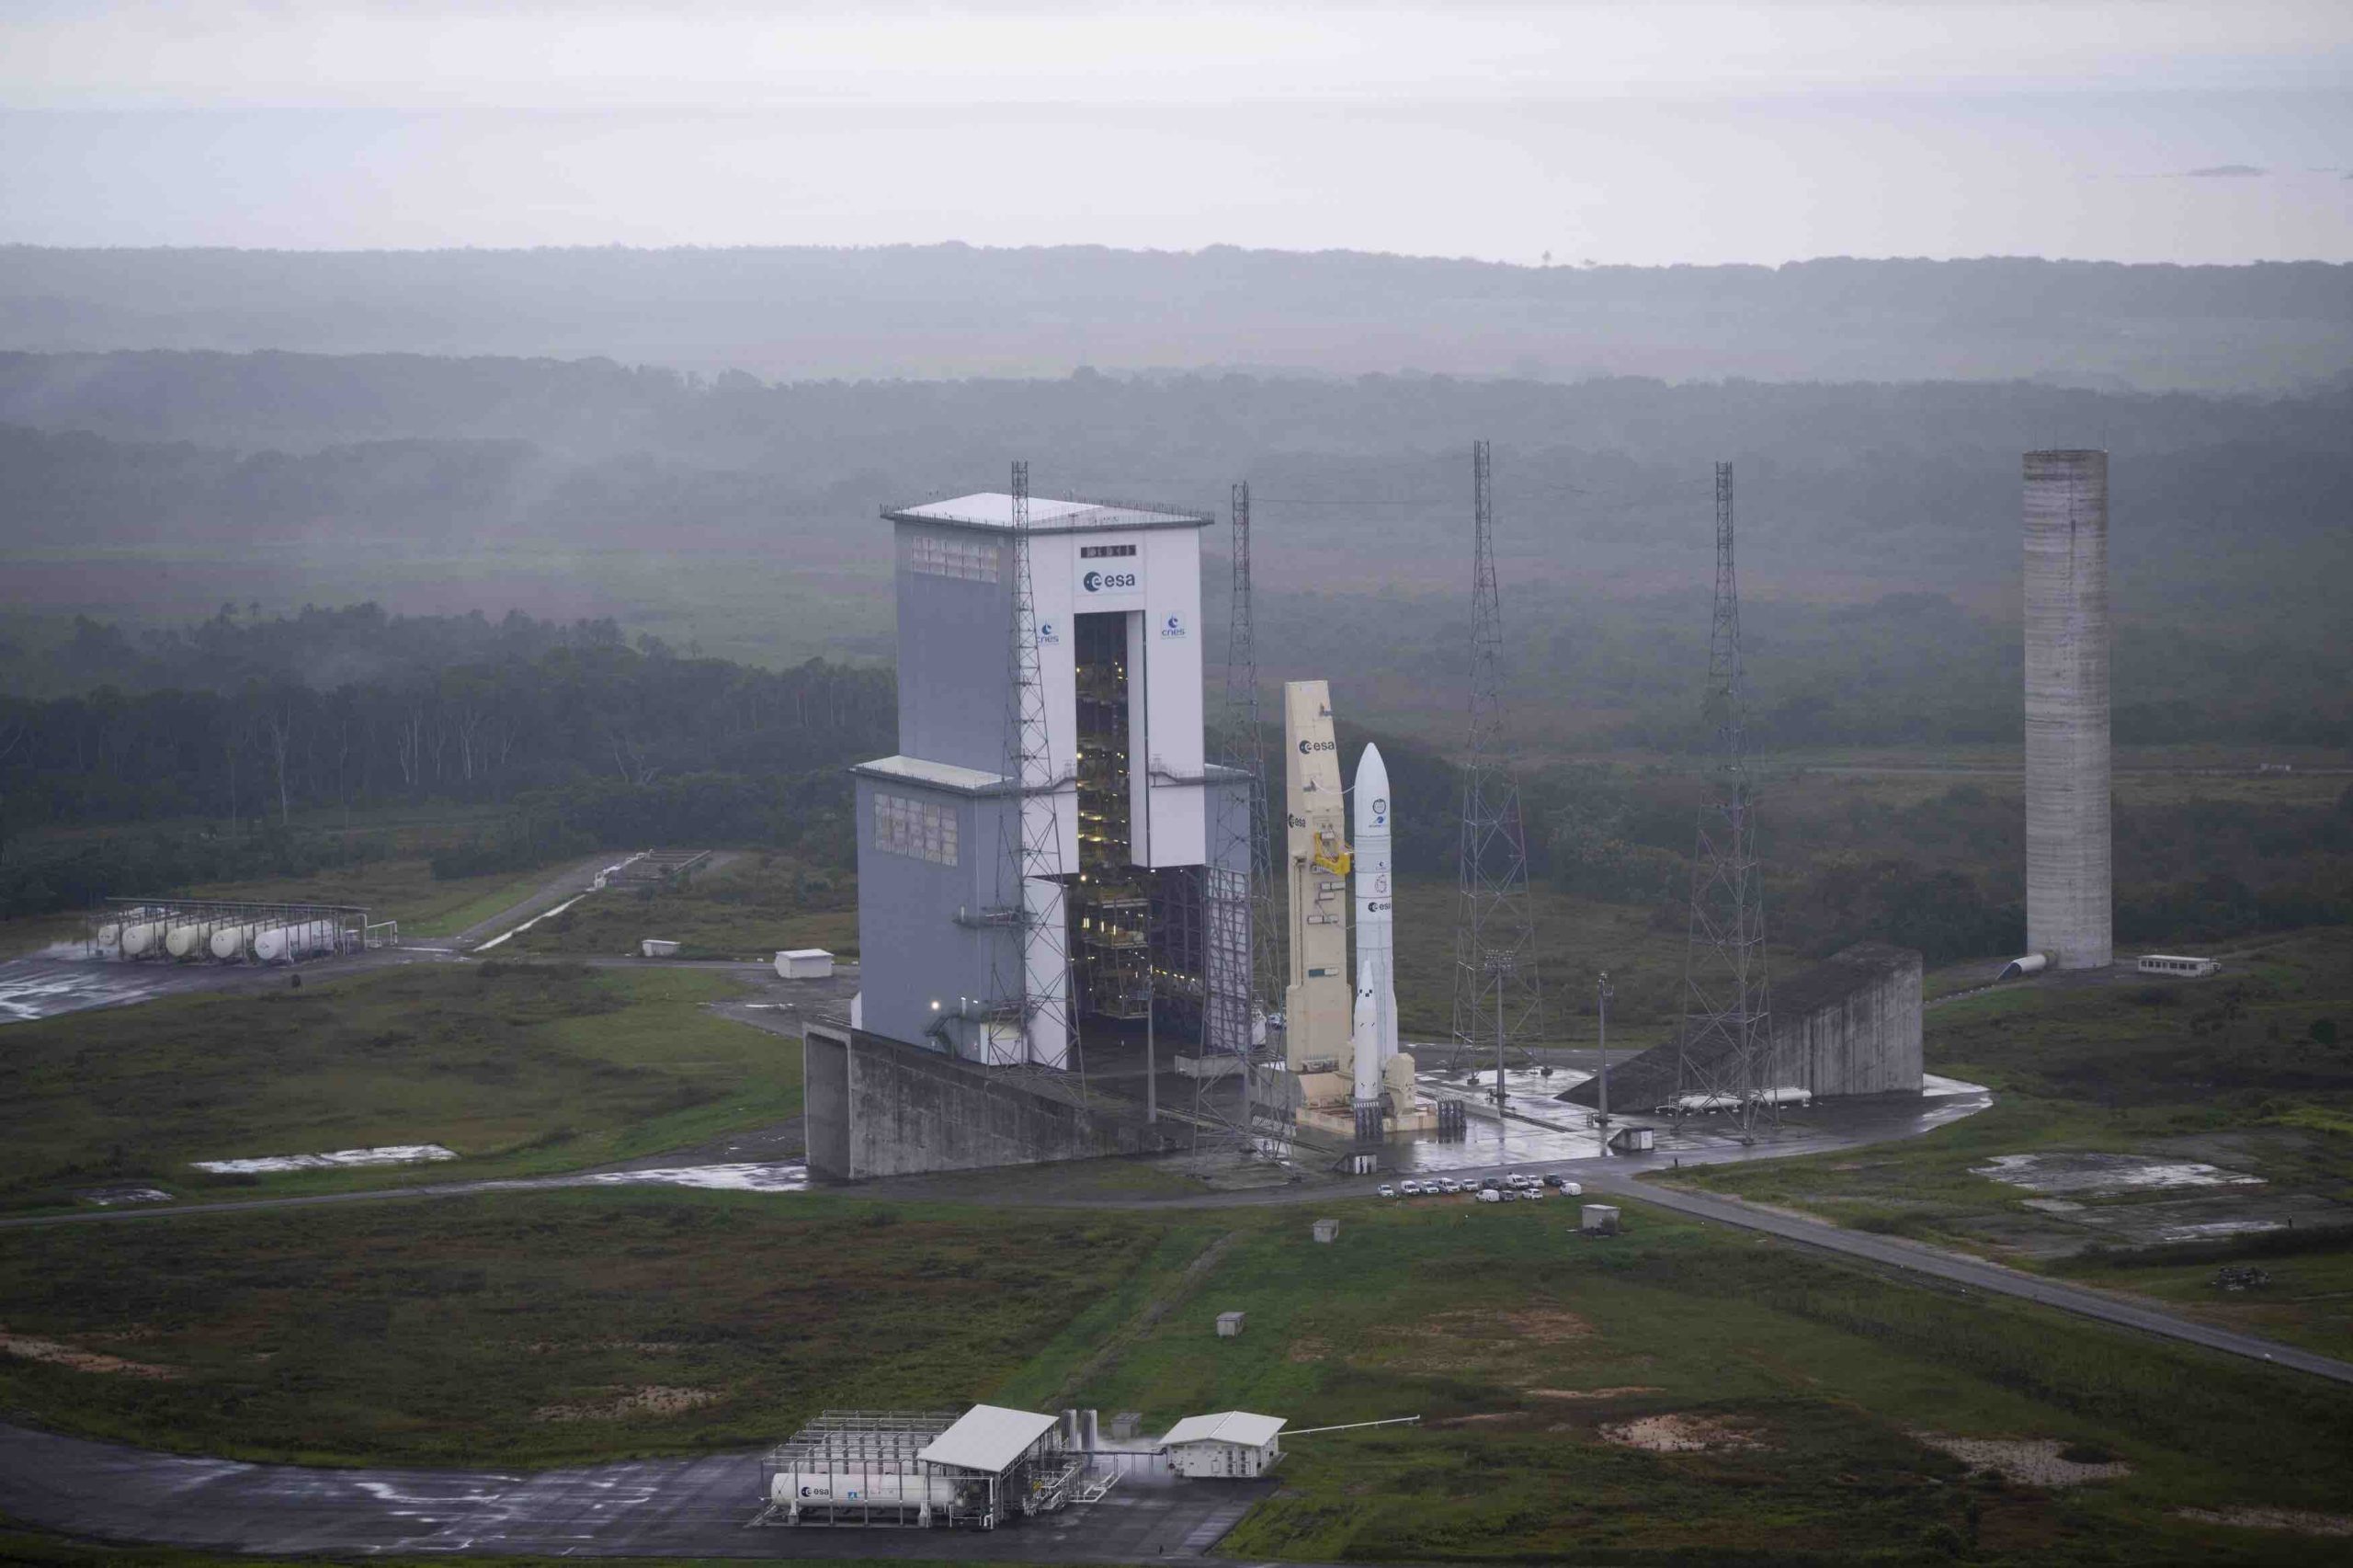 Ariane_6_from_above_in_the_final_hours_before_liftoff